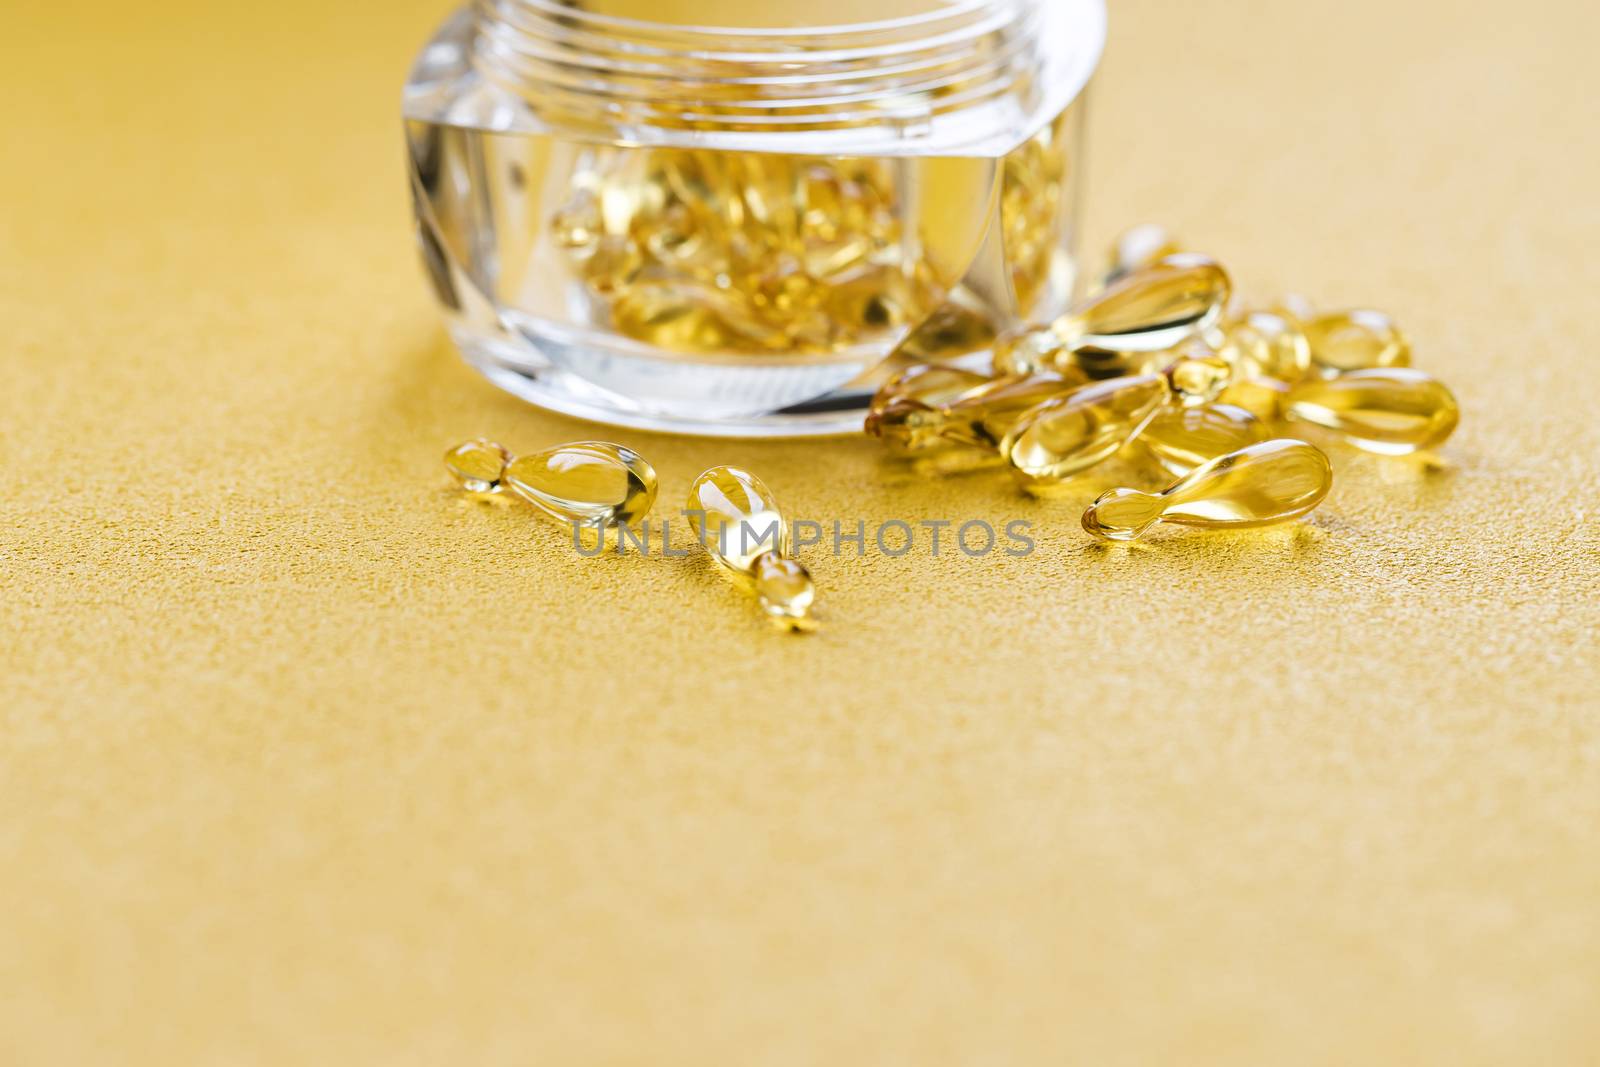 Pharmaceutical medicine tablets, capsules with vitamin D on a bright yellow background. by bonilook